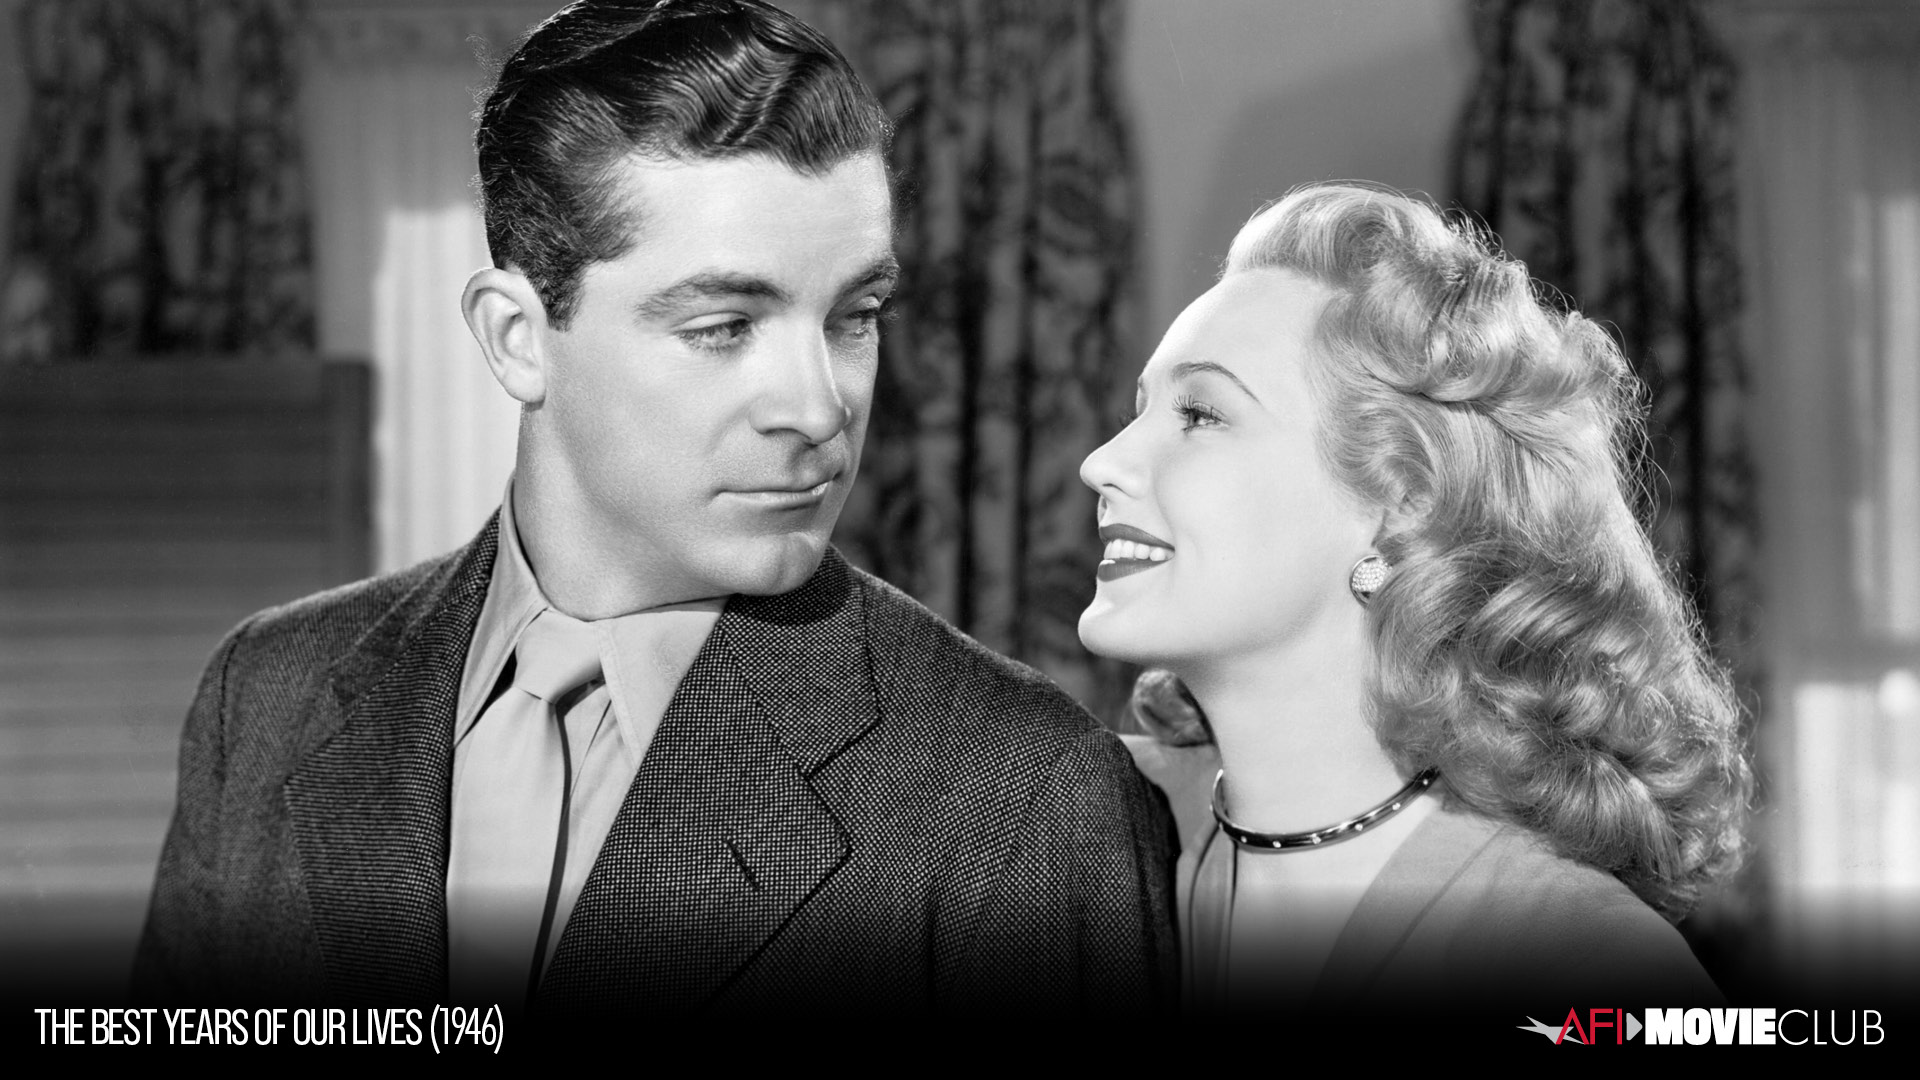 The Best Year of Our Lives Film Still - Dana Andrews and Virginia Mayo